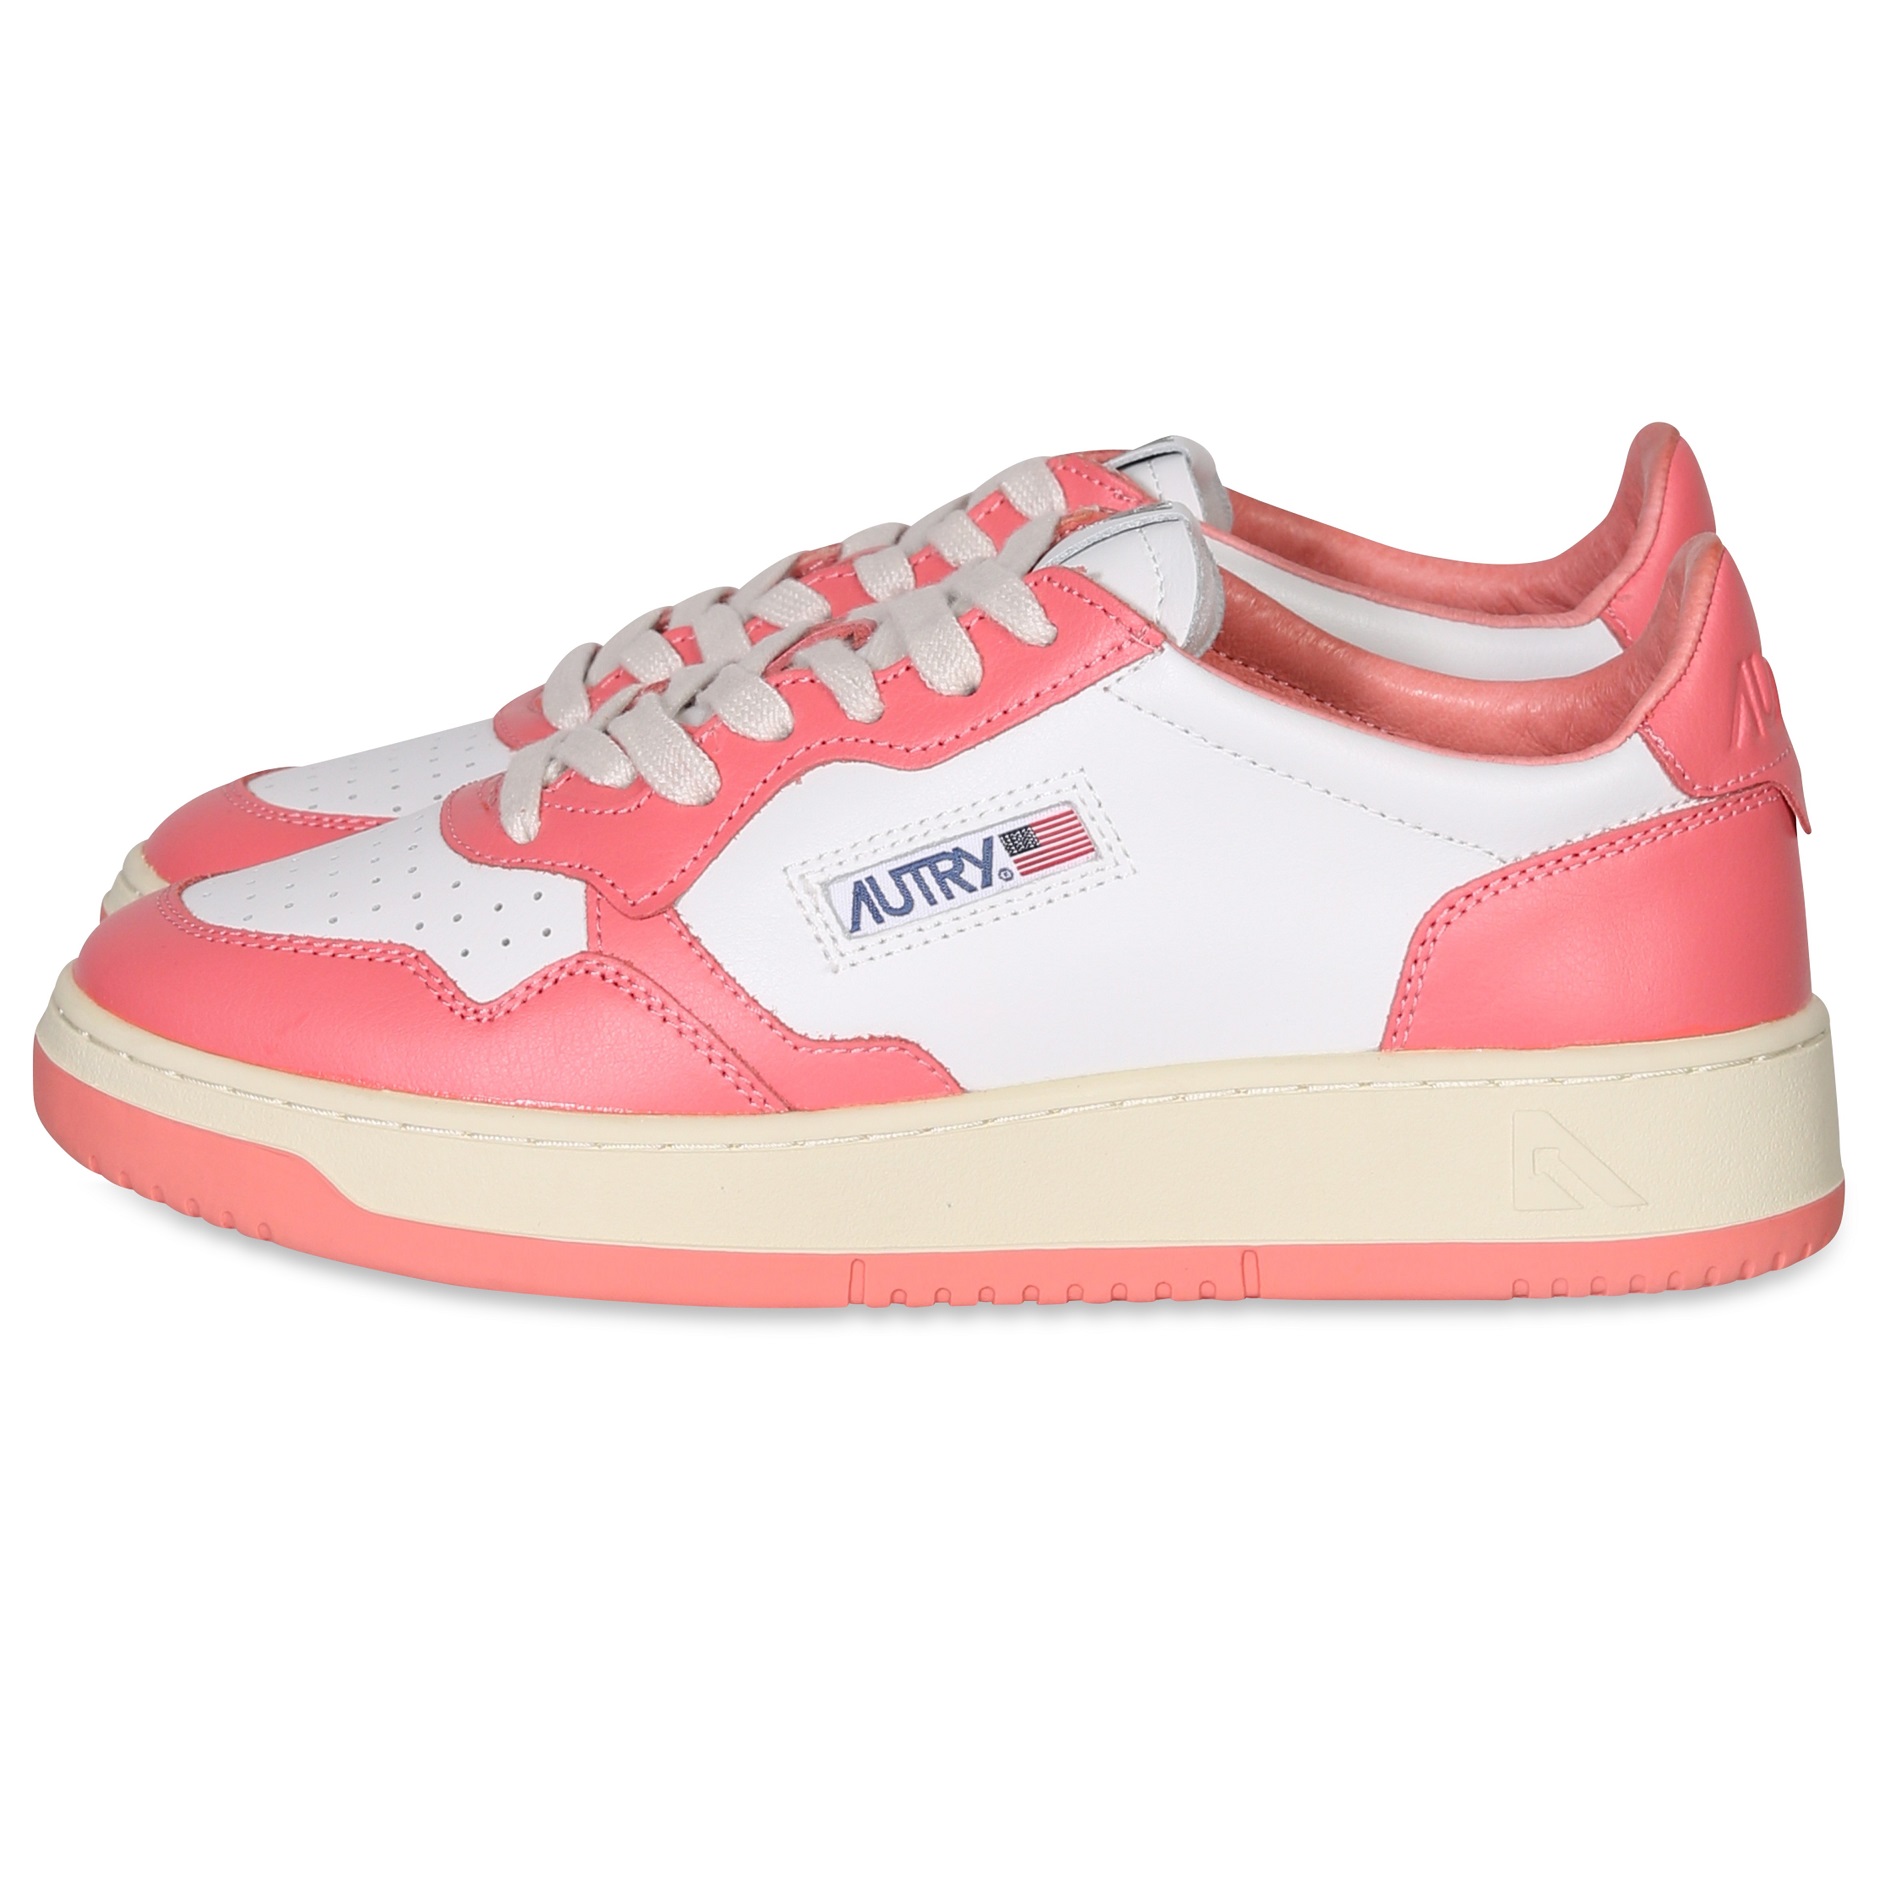 AUTRY ACTION SHOES Low Sneaker White/Tangerine